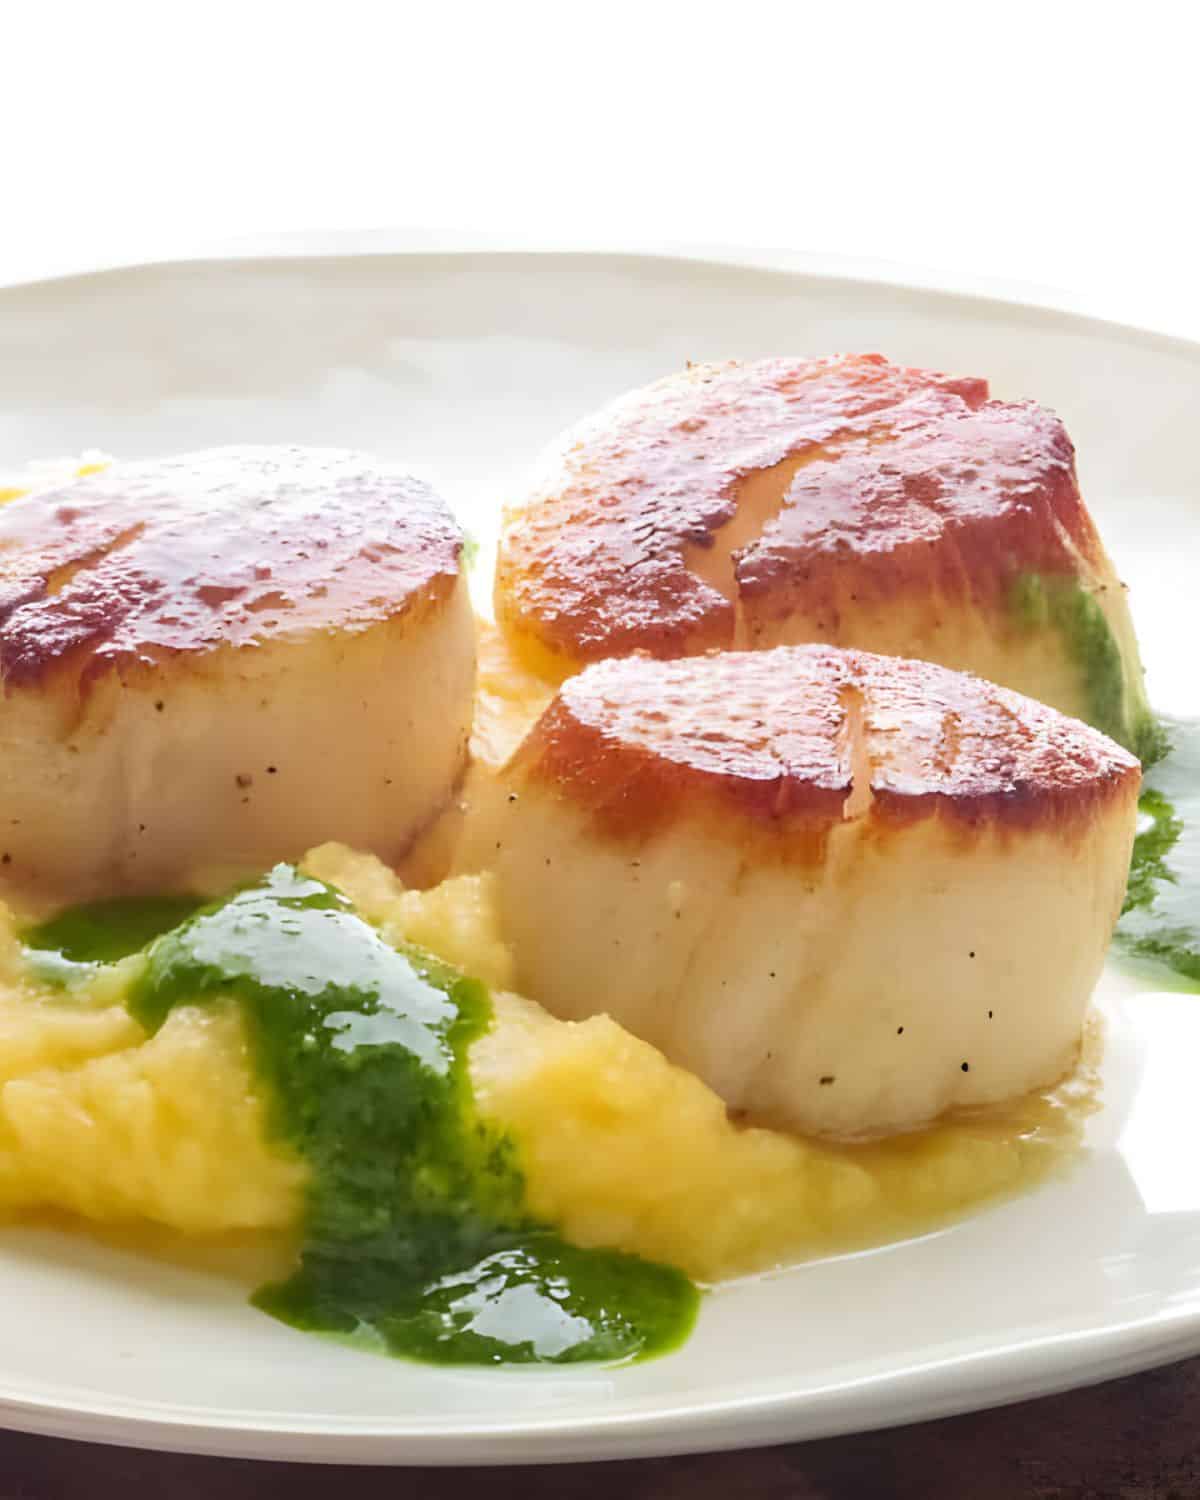 Seared Diver Scallops over root vegetable mash.